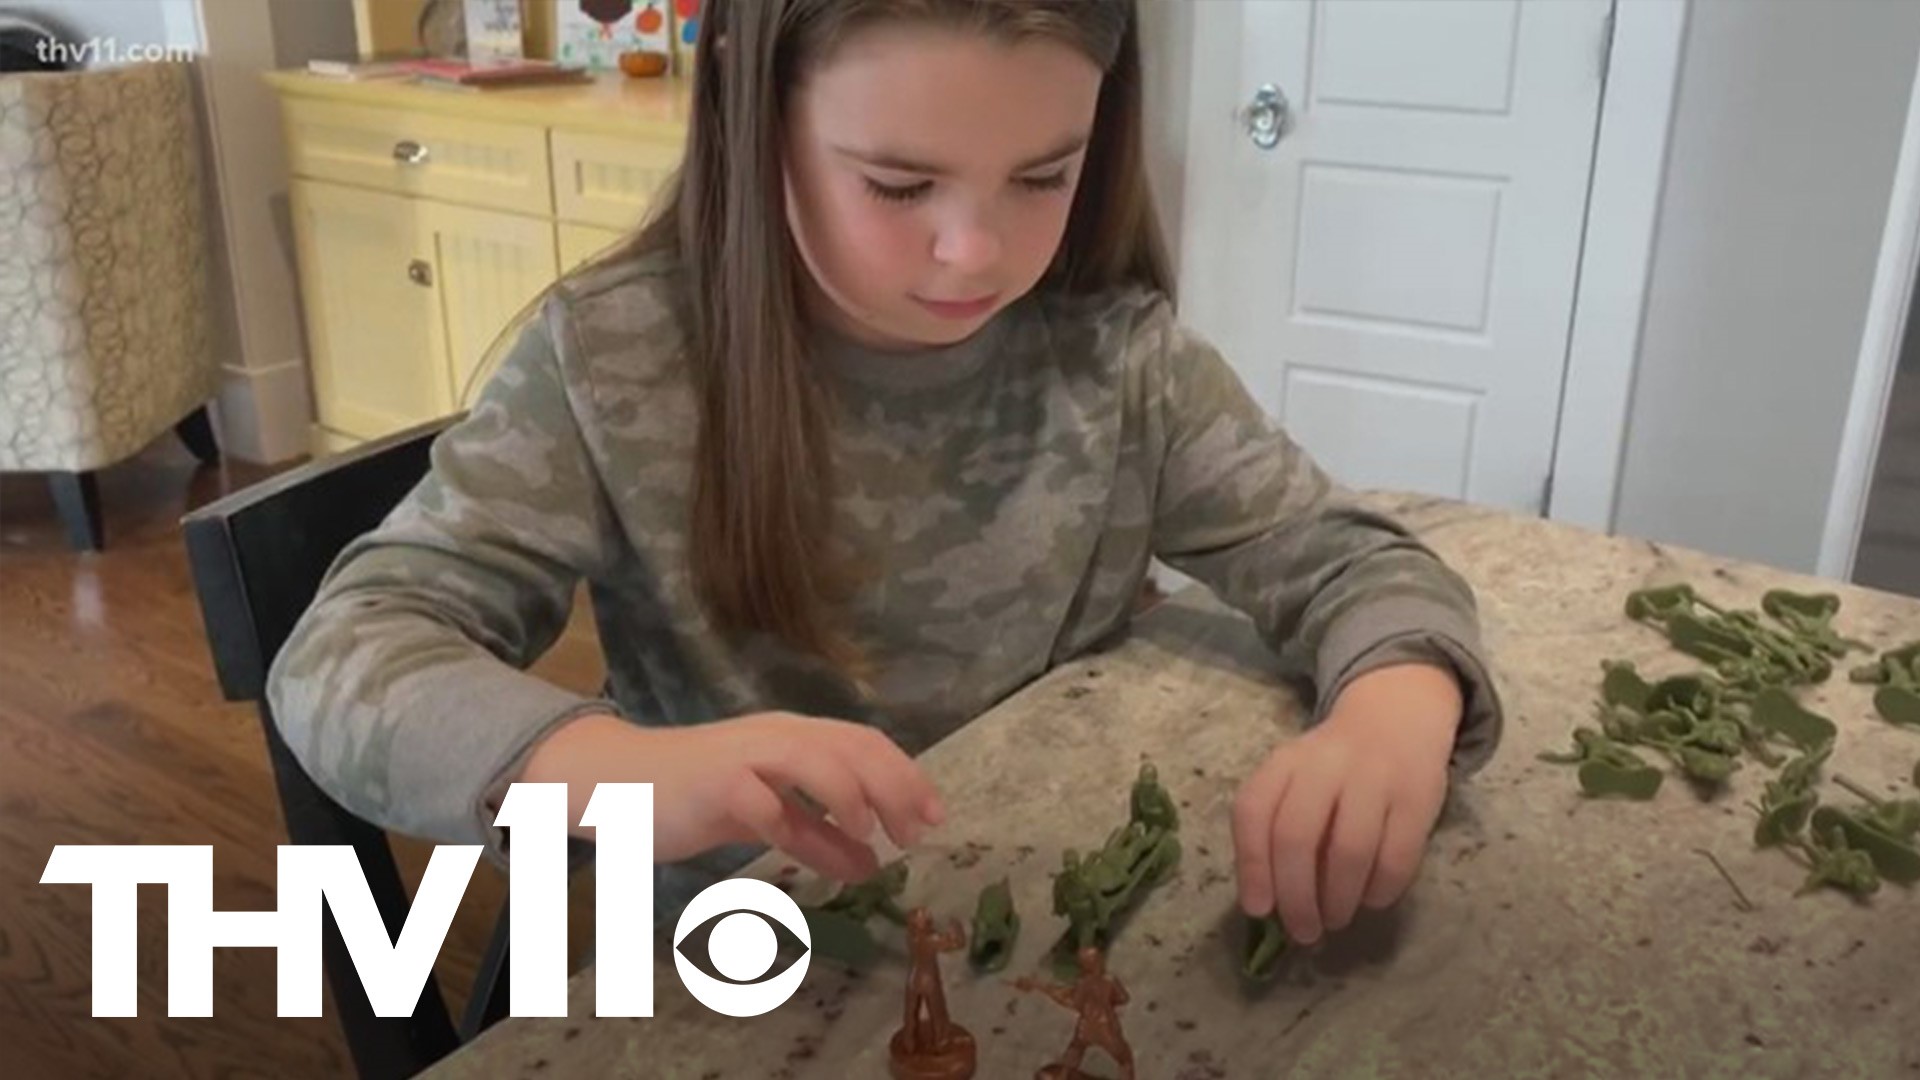 Vivian wrote letters to toy companies in July 2019, asking why they didn't make girl soldiers. Now, Vivian's wish has come true just in time for Christmas 2020!